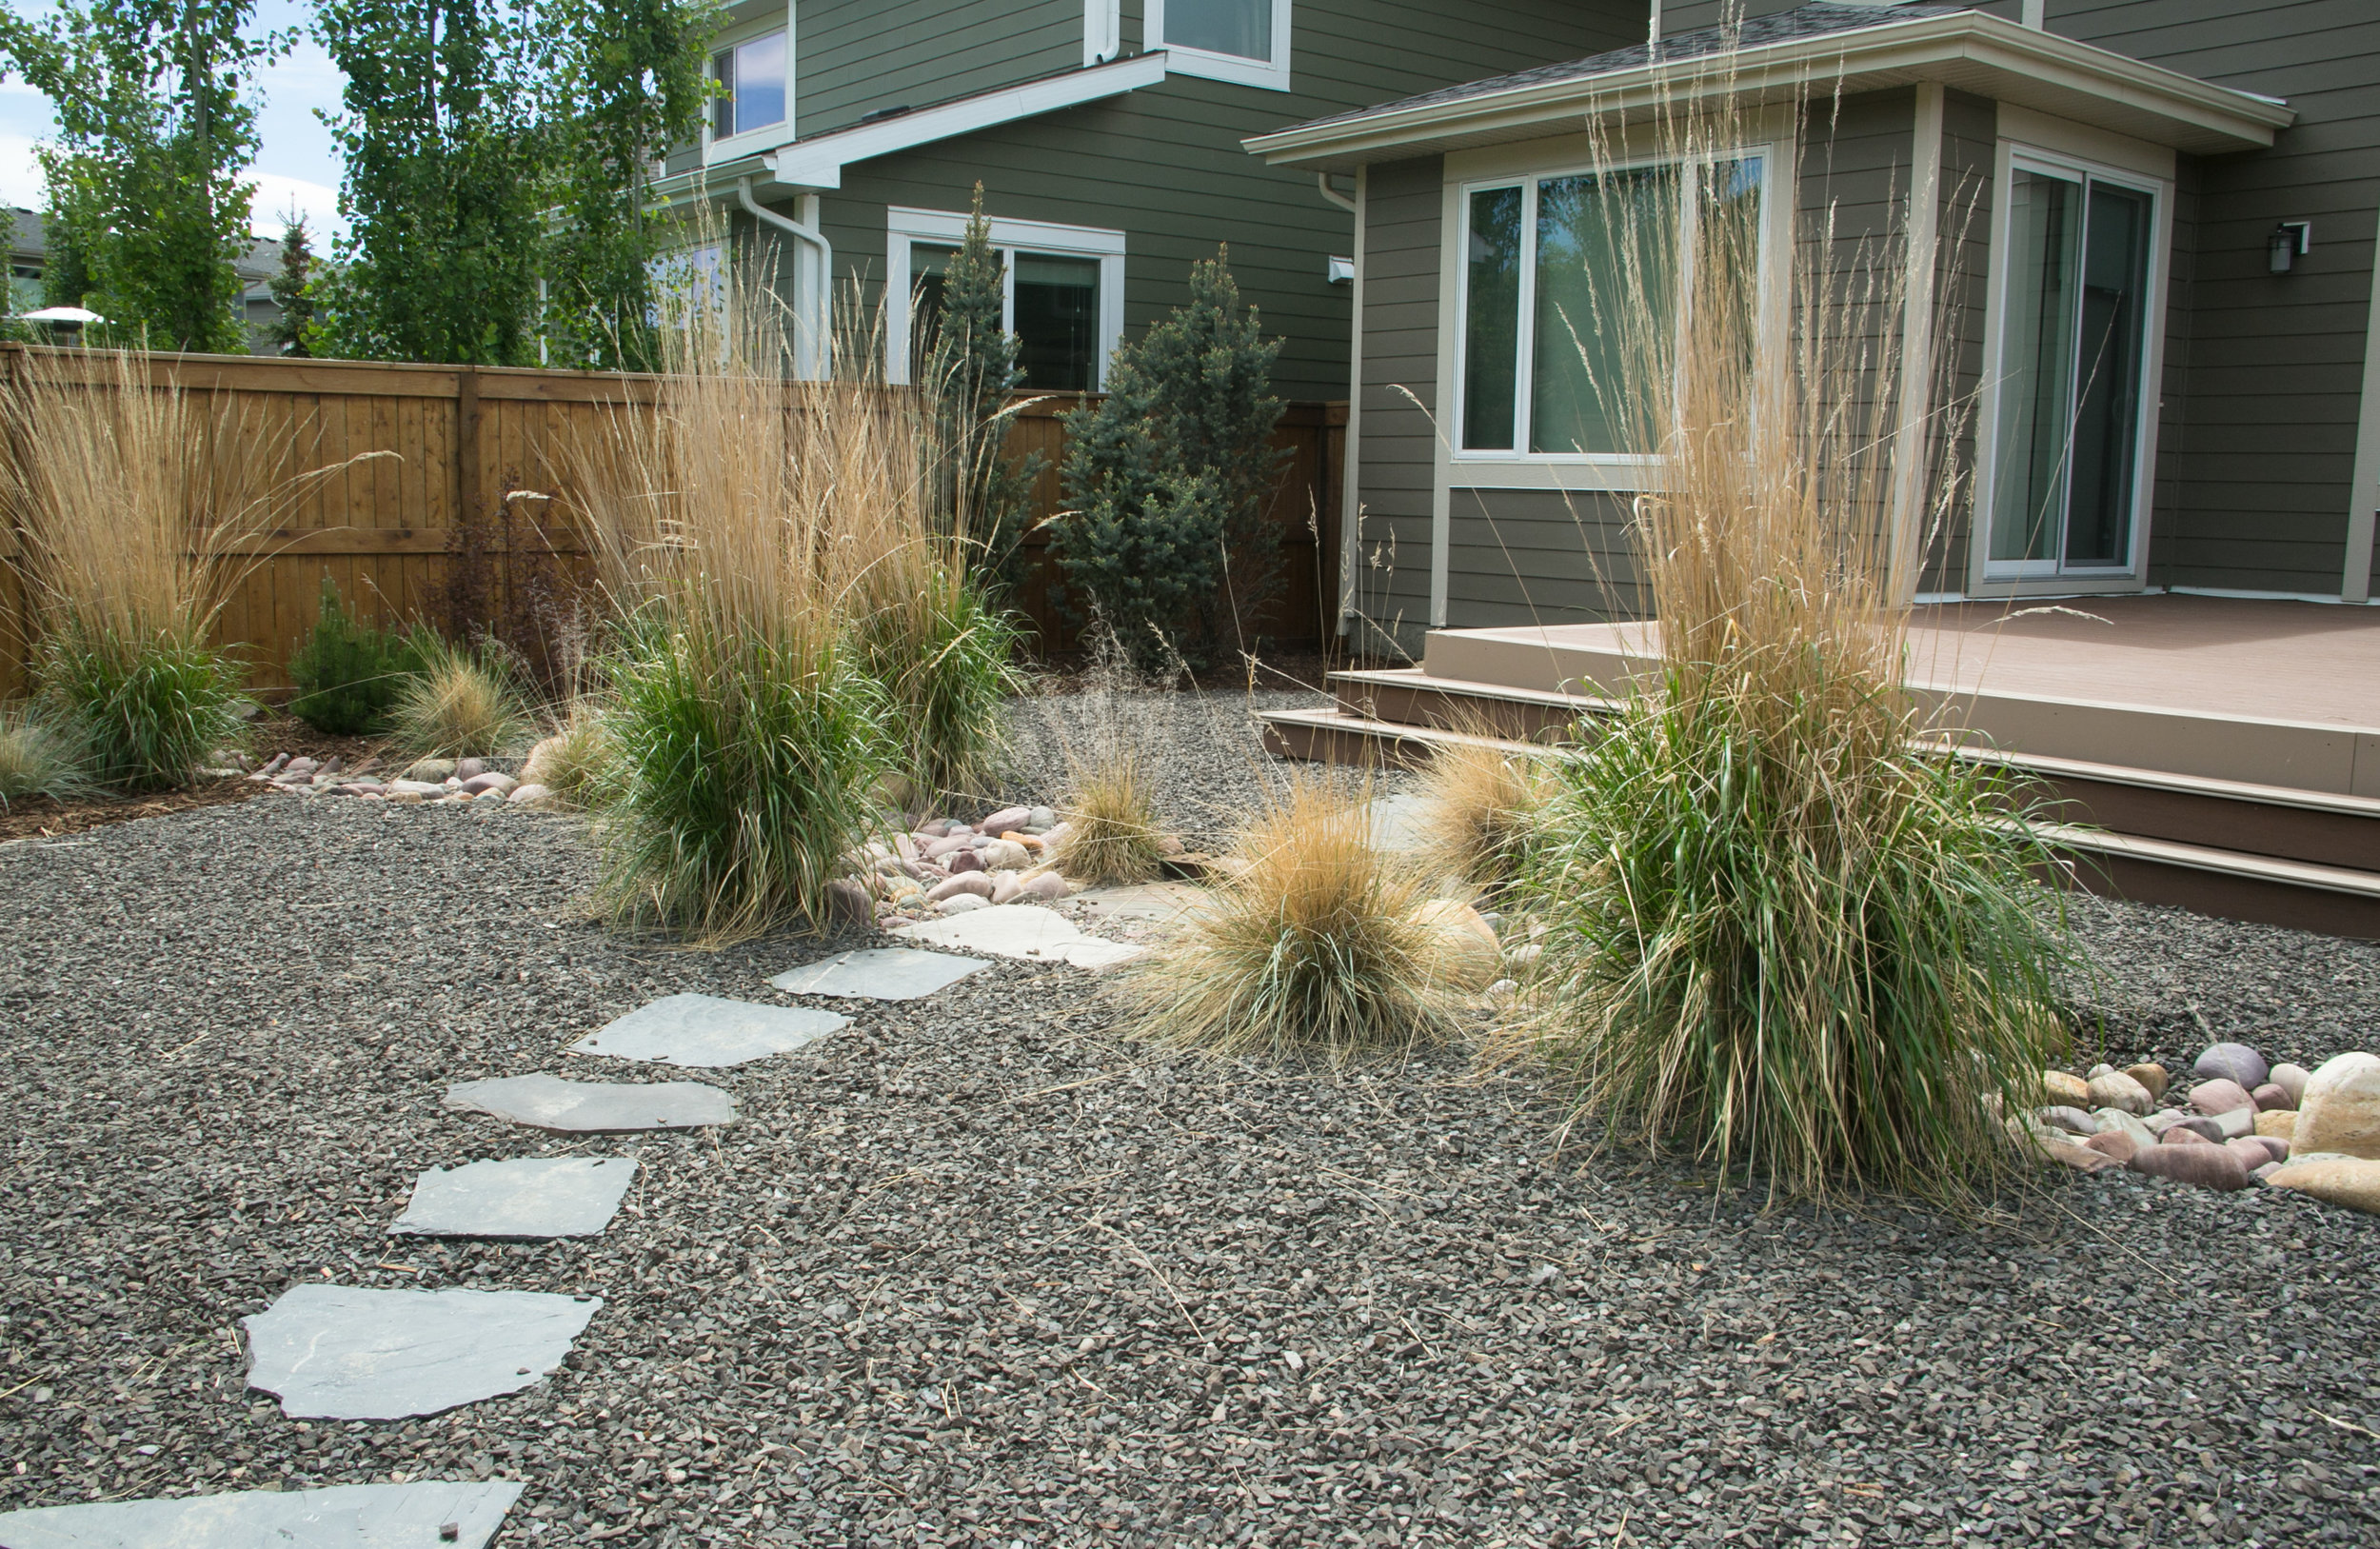  Xerascaped yard with paving stone pathway and composite deck — Cranston, Calgary. 